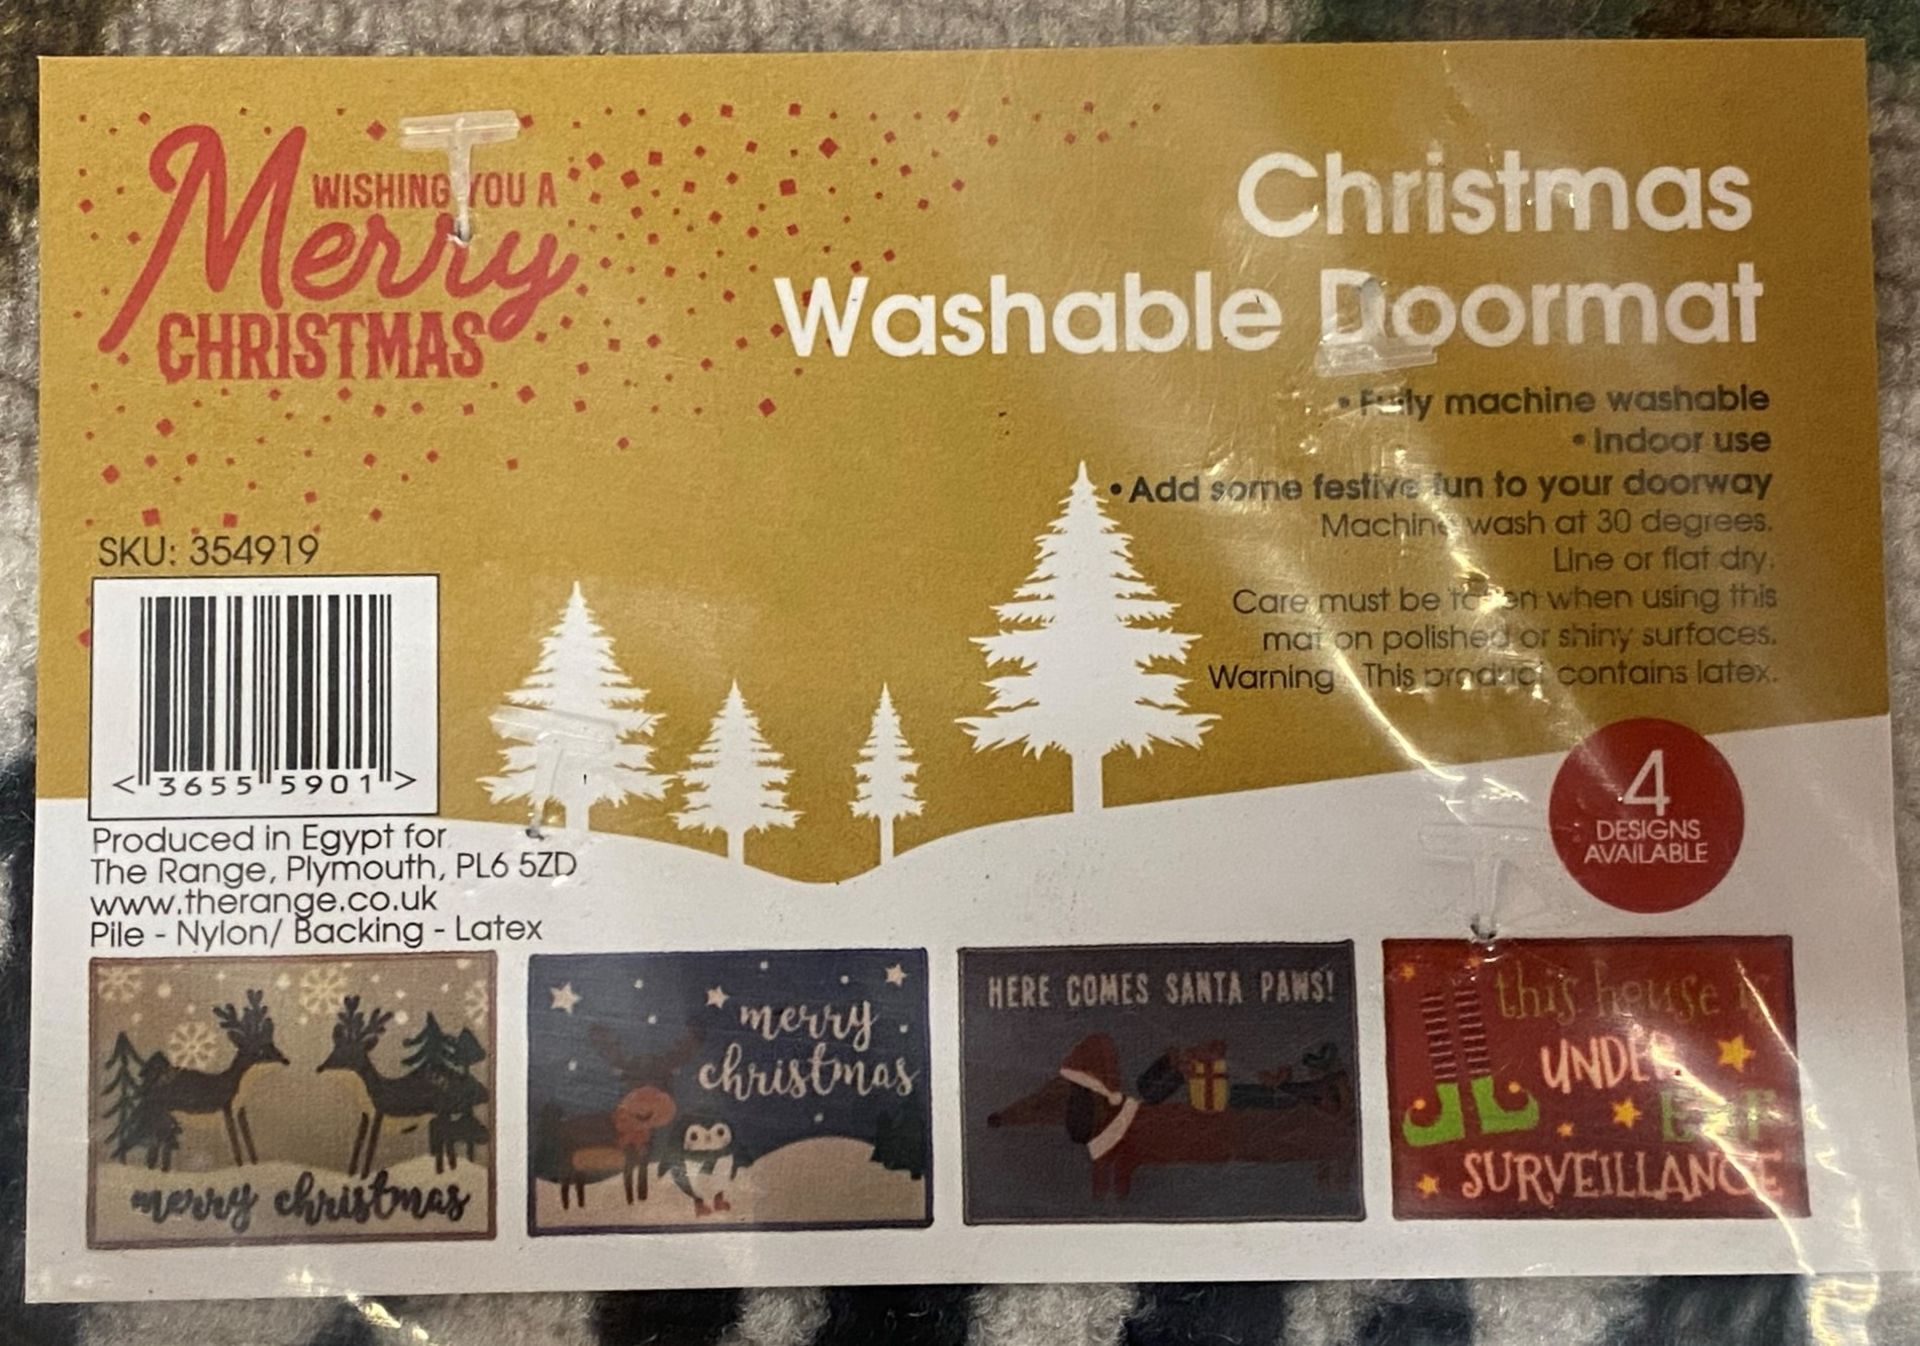 16 x Washable Christmas Doormats - 40cm x 58cm - sealed pack contains 4 different designs - Image 2 of 3